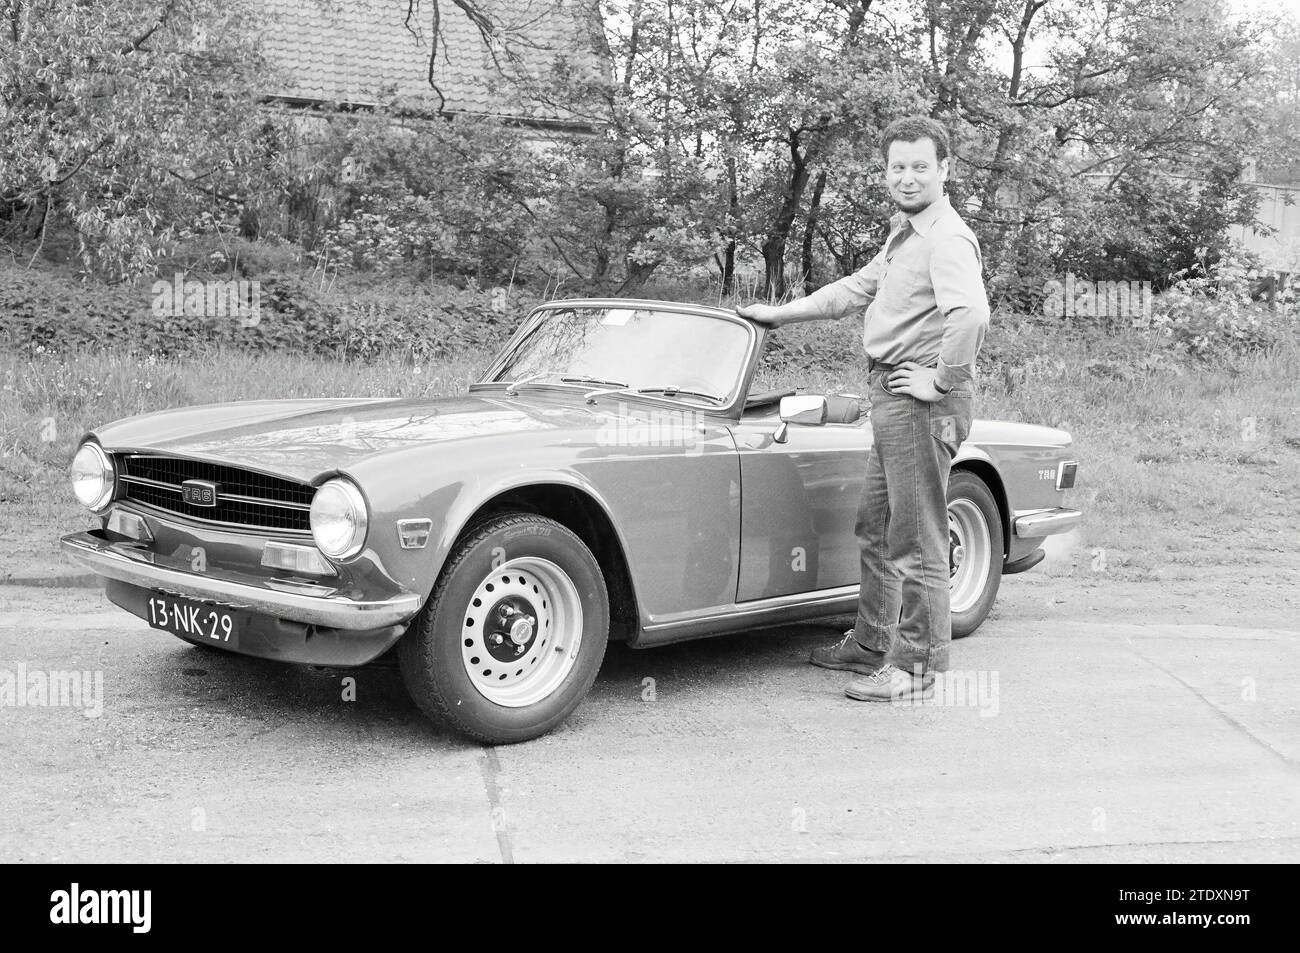 Man and car Triumph Spitfire TR6, 23-05-1983, Whizgle News from the Past, Tailored for the Future. Explore historical narratives, Dutch The Netherlands agency image with a modern perspective, bridging the gap between yesterday's events and tomorrow's insights. A timeless journey shaping the stories that shape our future. Stock Photo